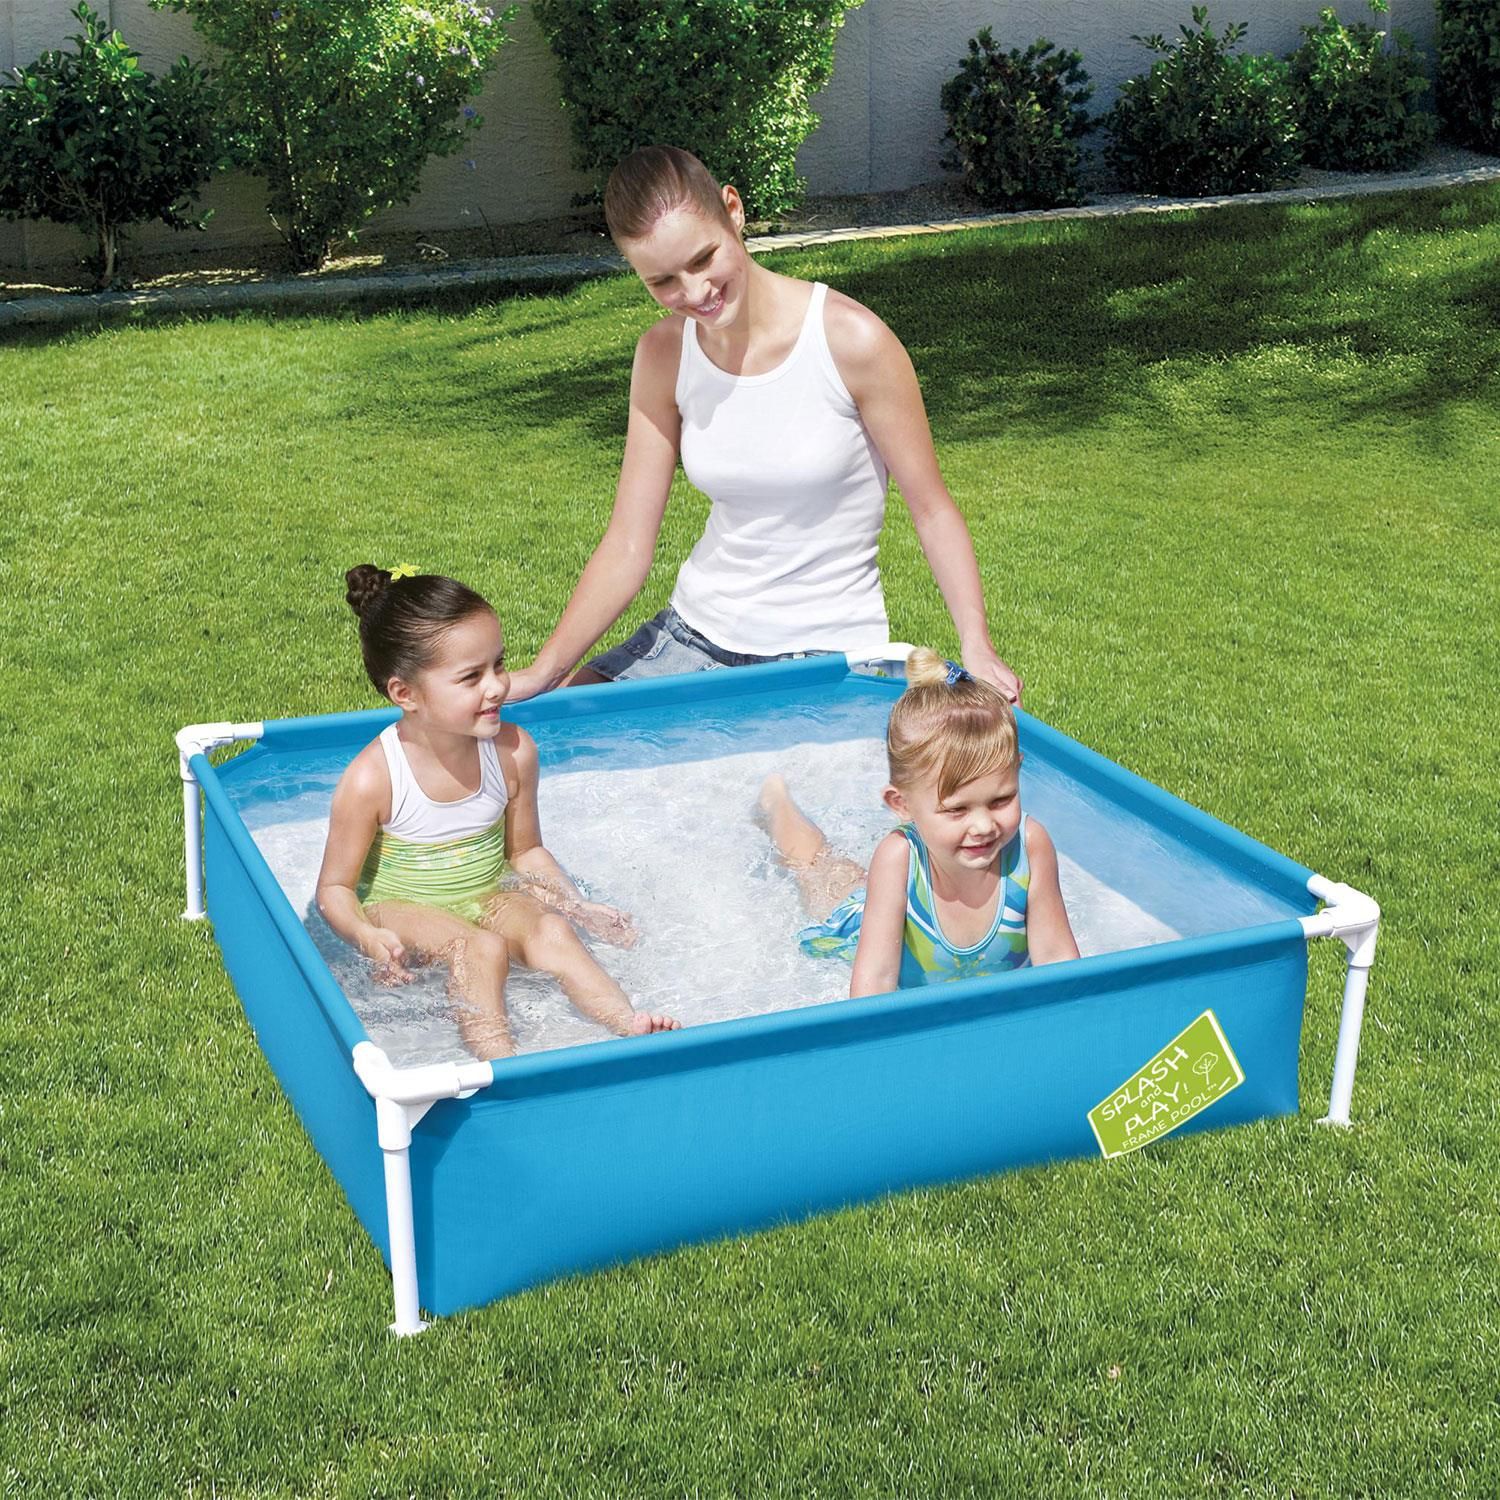 Bestway Splash and Play Rectangular Blue Frame Pool 48'' x 48'' x 12'', 365L.  Designed to get kids moving, grooving and out of the house, the Bestway My First Frame Pool is quality-tested and puts the focus back on fun! This pool is great for kids to splash and play in. This pool is easy to set up and is constructed of rust-resistant metal frames. The pool is easy to take down for storage. Splashing in the sun has never been more fun than with My First Frame Pool!

Features : 
Easy set up
Corrosion resistant metal frames
Easy to take down for off-season storage
Rectangular shape provides more area for swimming and playing
Water Capacity (90%): 365L (96gal.)
Underwater adhesive repair patch 

Installation of Swimming Pool :
It is essential the pool is set up on solid, level ground. If the pool is set up on uneven ground it can cause collapse of the pool and flooding, causing serious personal injury and/or damage to personal property. Setting up on uneven ground will void the warranty and service claims.
Do not set up on driveways, decks, platforms, gravel or asphalt. Ground should be firm enough to withstand the pressure of the water; mud, sand, soft / loose soil or tar are not suitable.
The ground must be cleared of all objects and debris including stones and twigs.


Box Contains :
1 x Bestway 48